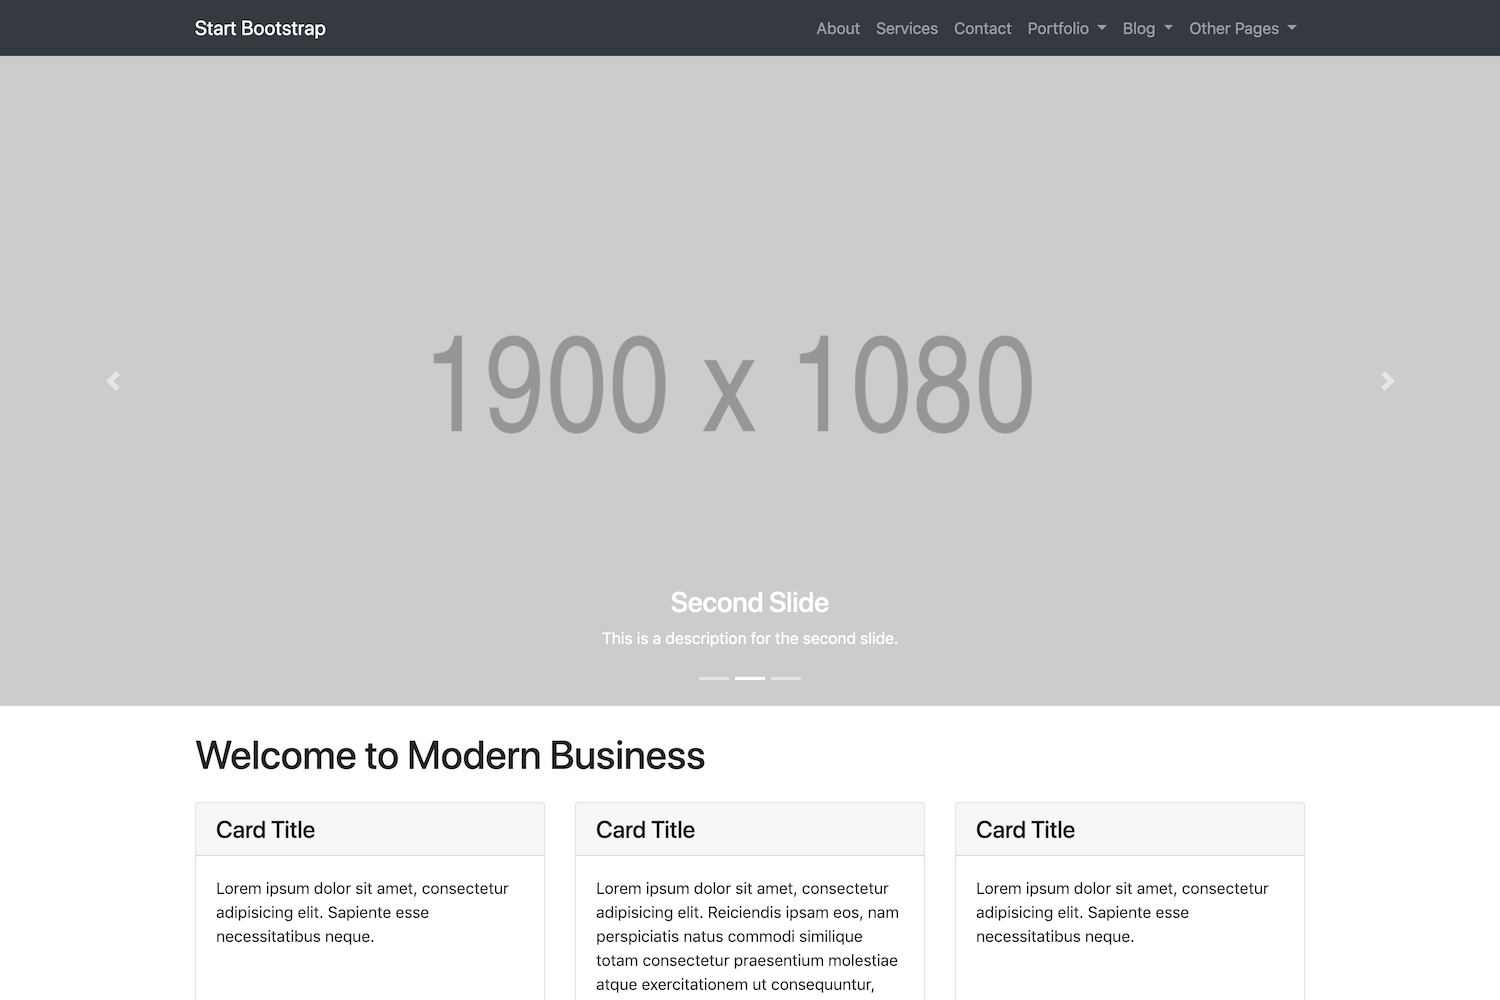 Modern Business – Full Website Template For Bootstrap 4 Throughout Index Card Template For Pages